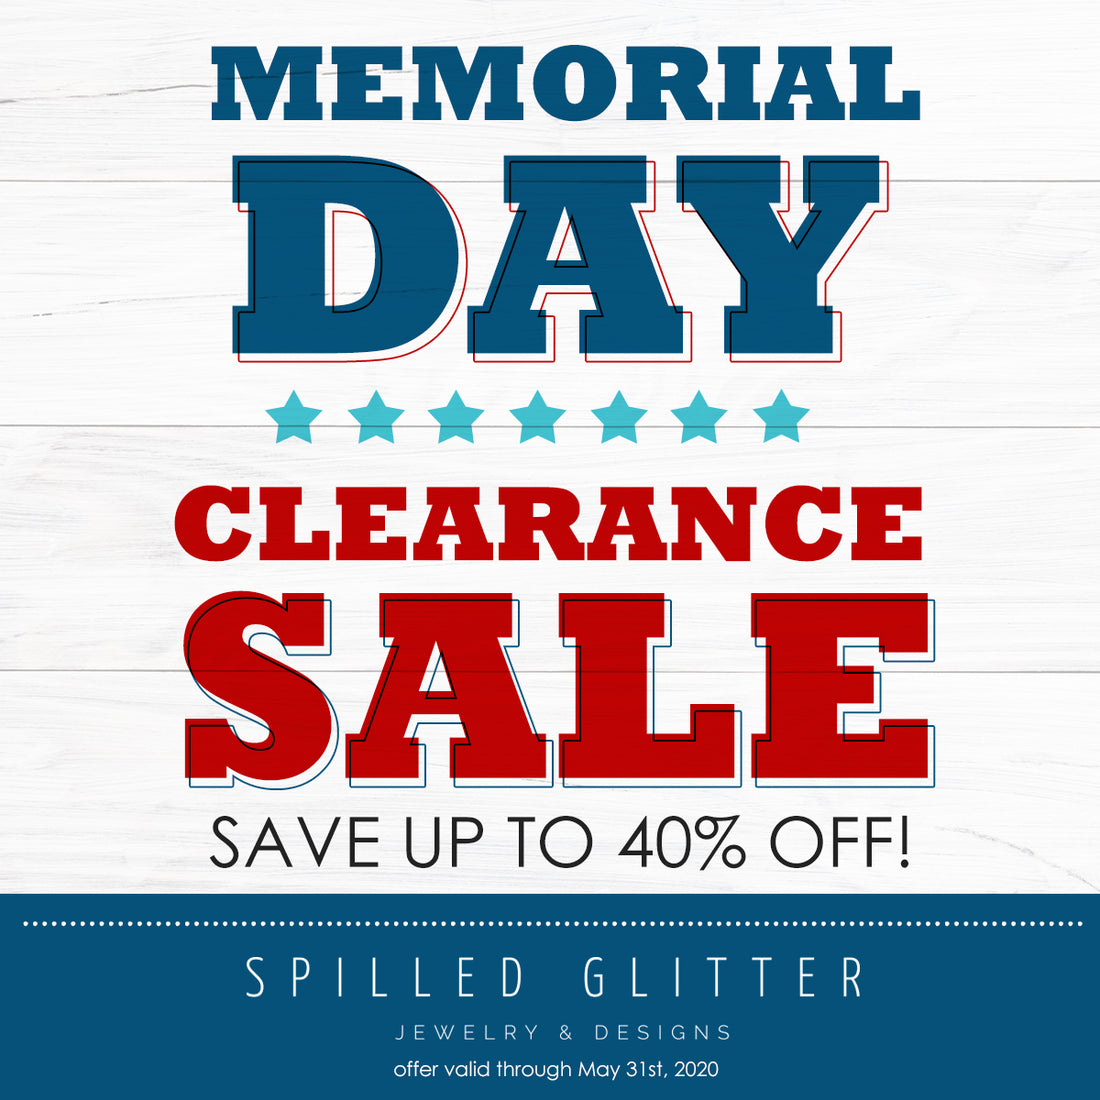 2020 Memorial Day Clearance Sale